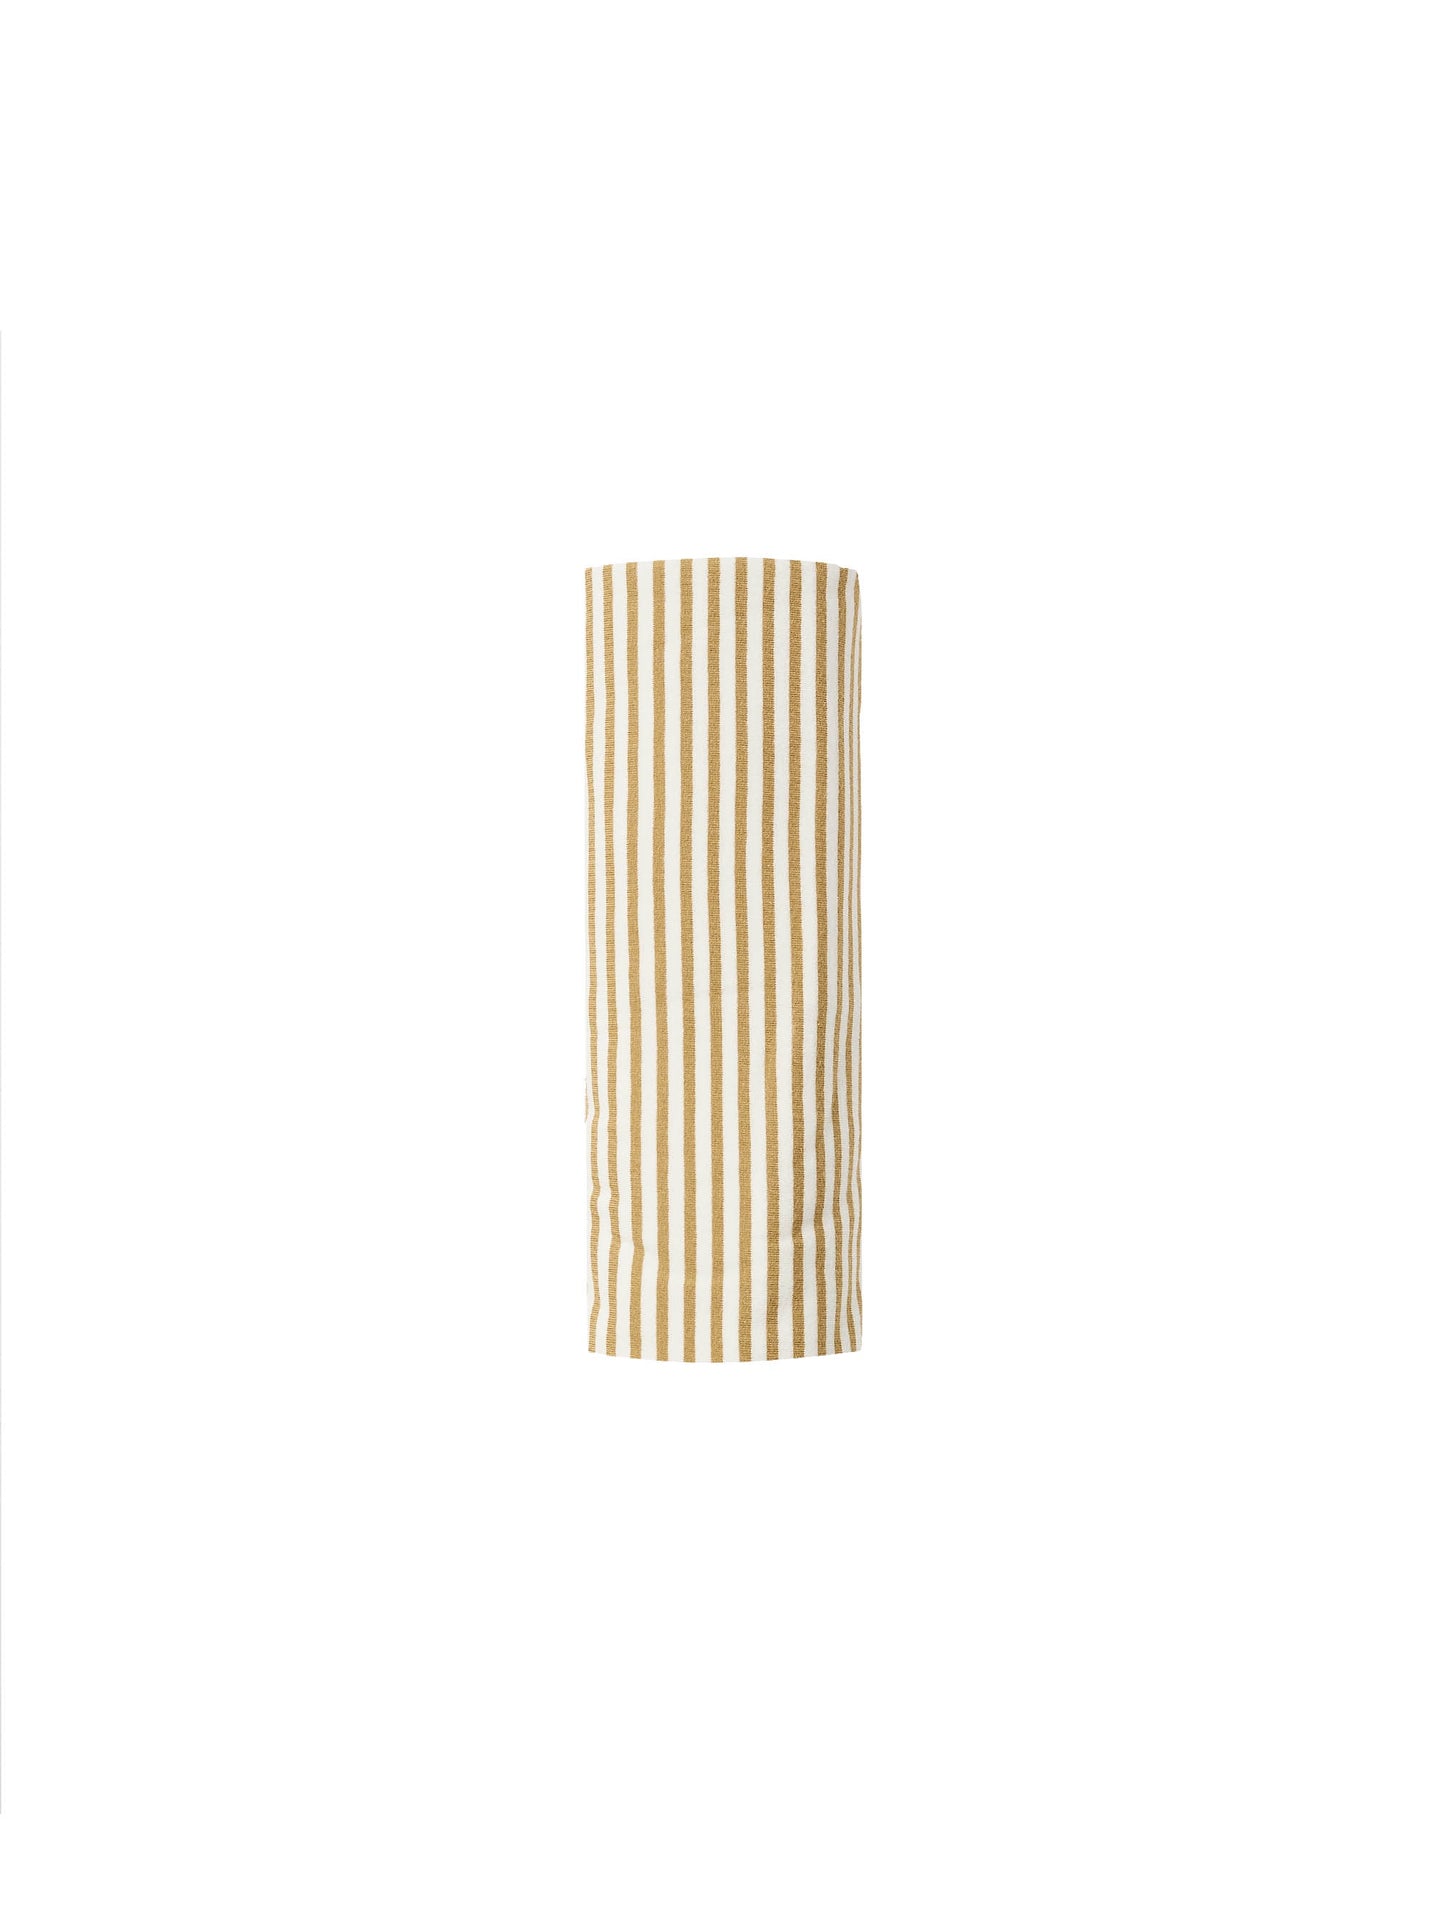 Quincy Mae - Swaddle - Gold Stripe